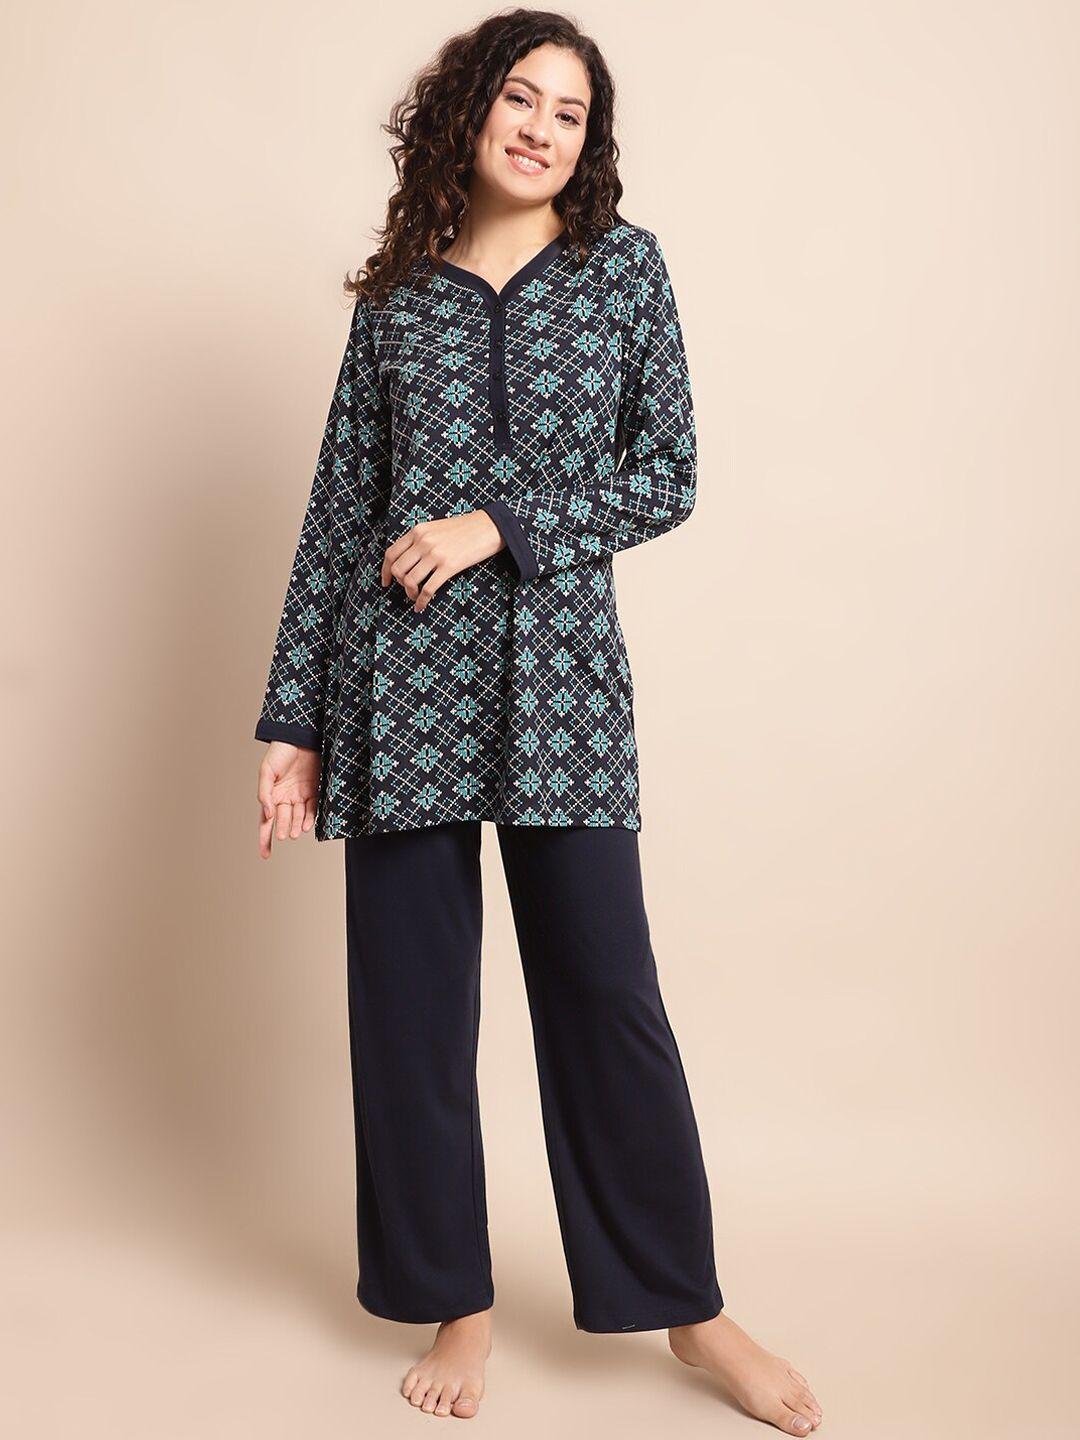 kanvin-ethnic-motifs-printed-night-suits